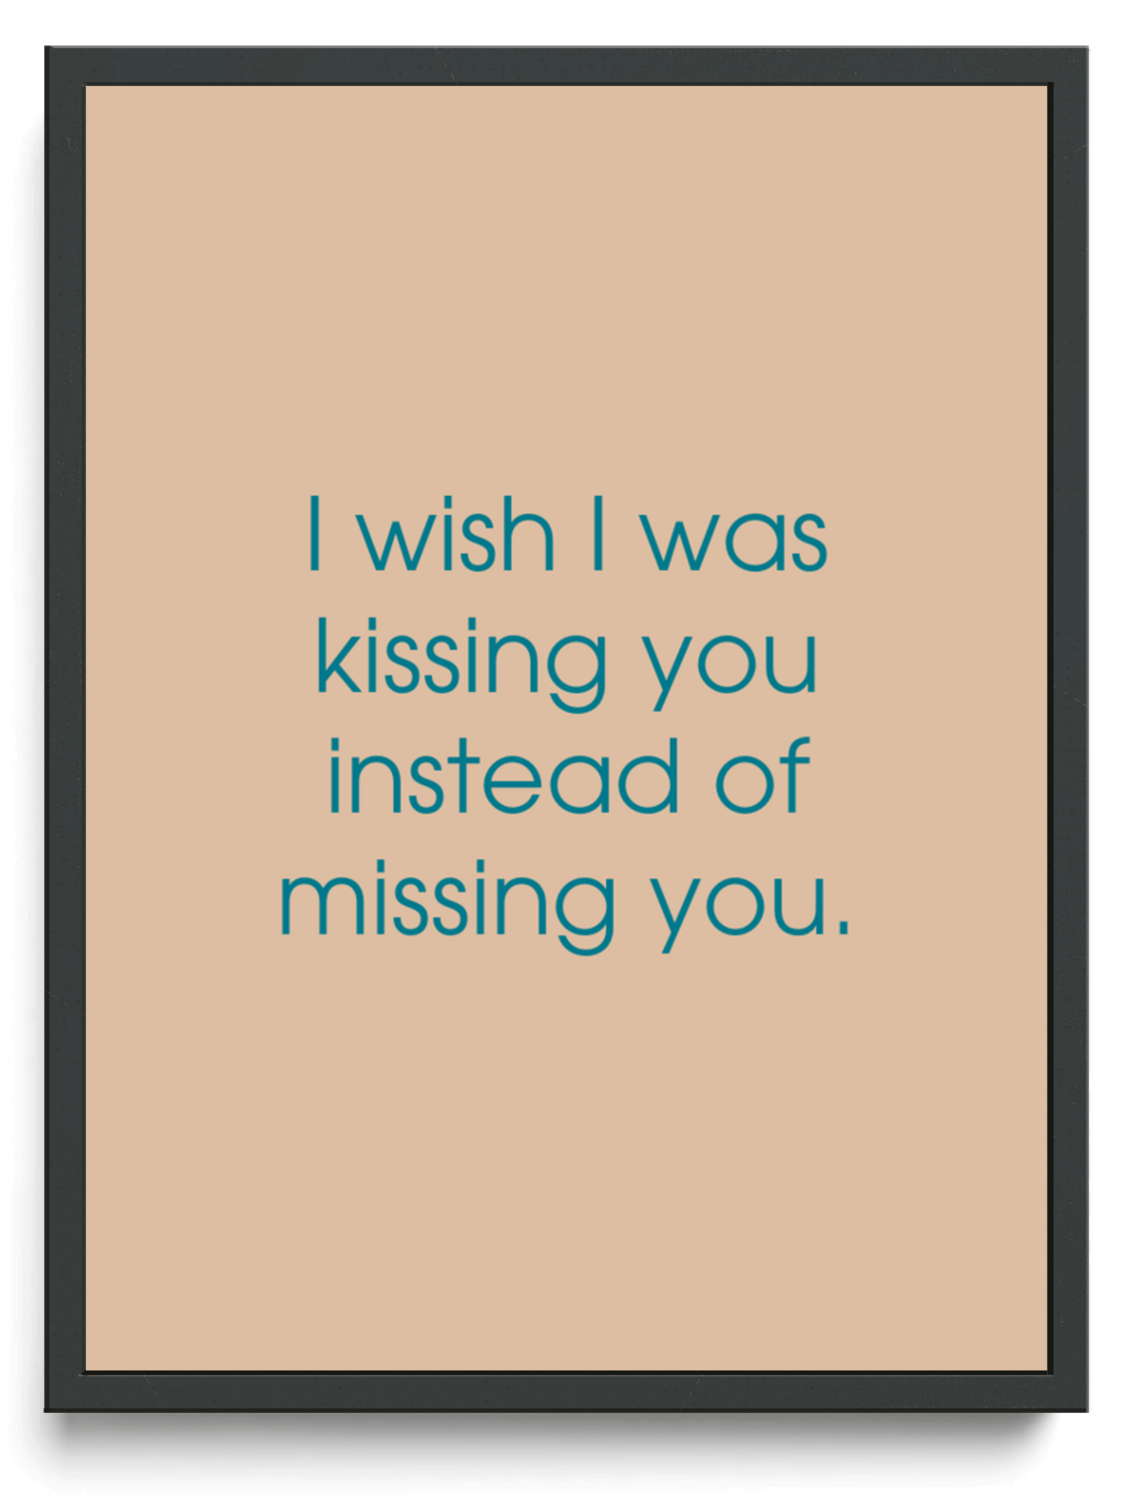 I wish I was kissing you instead of missing you framed typographic print